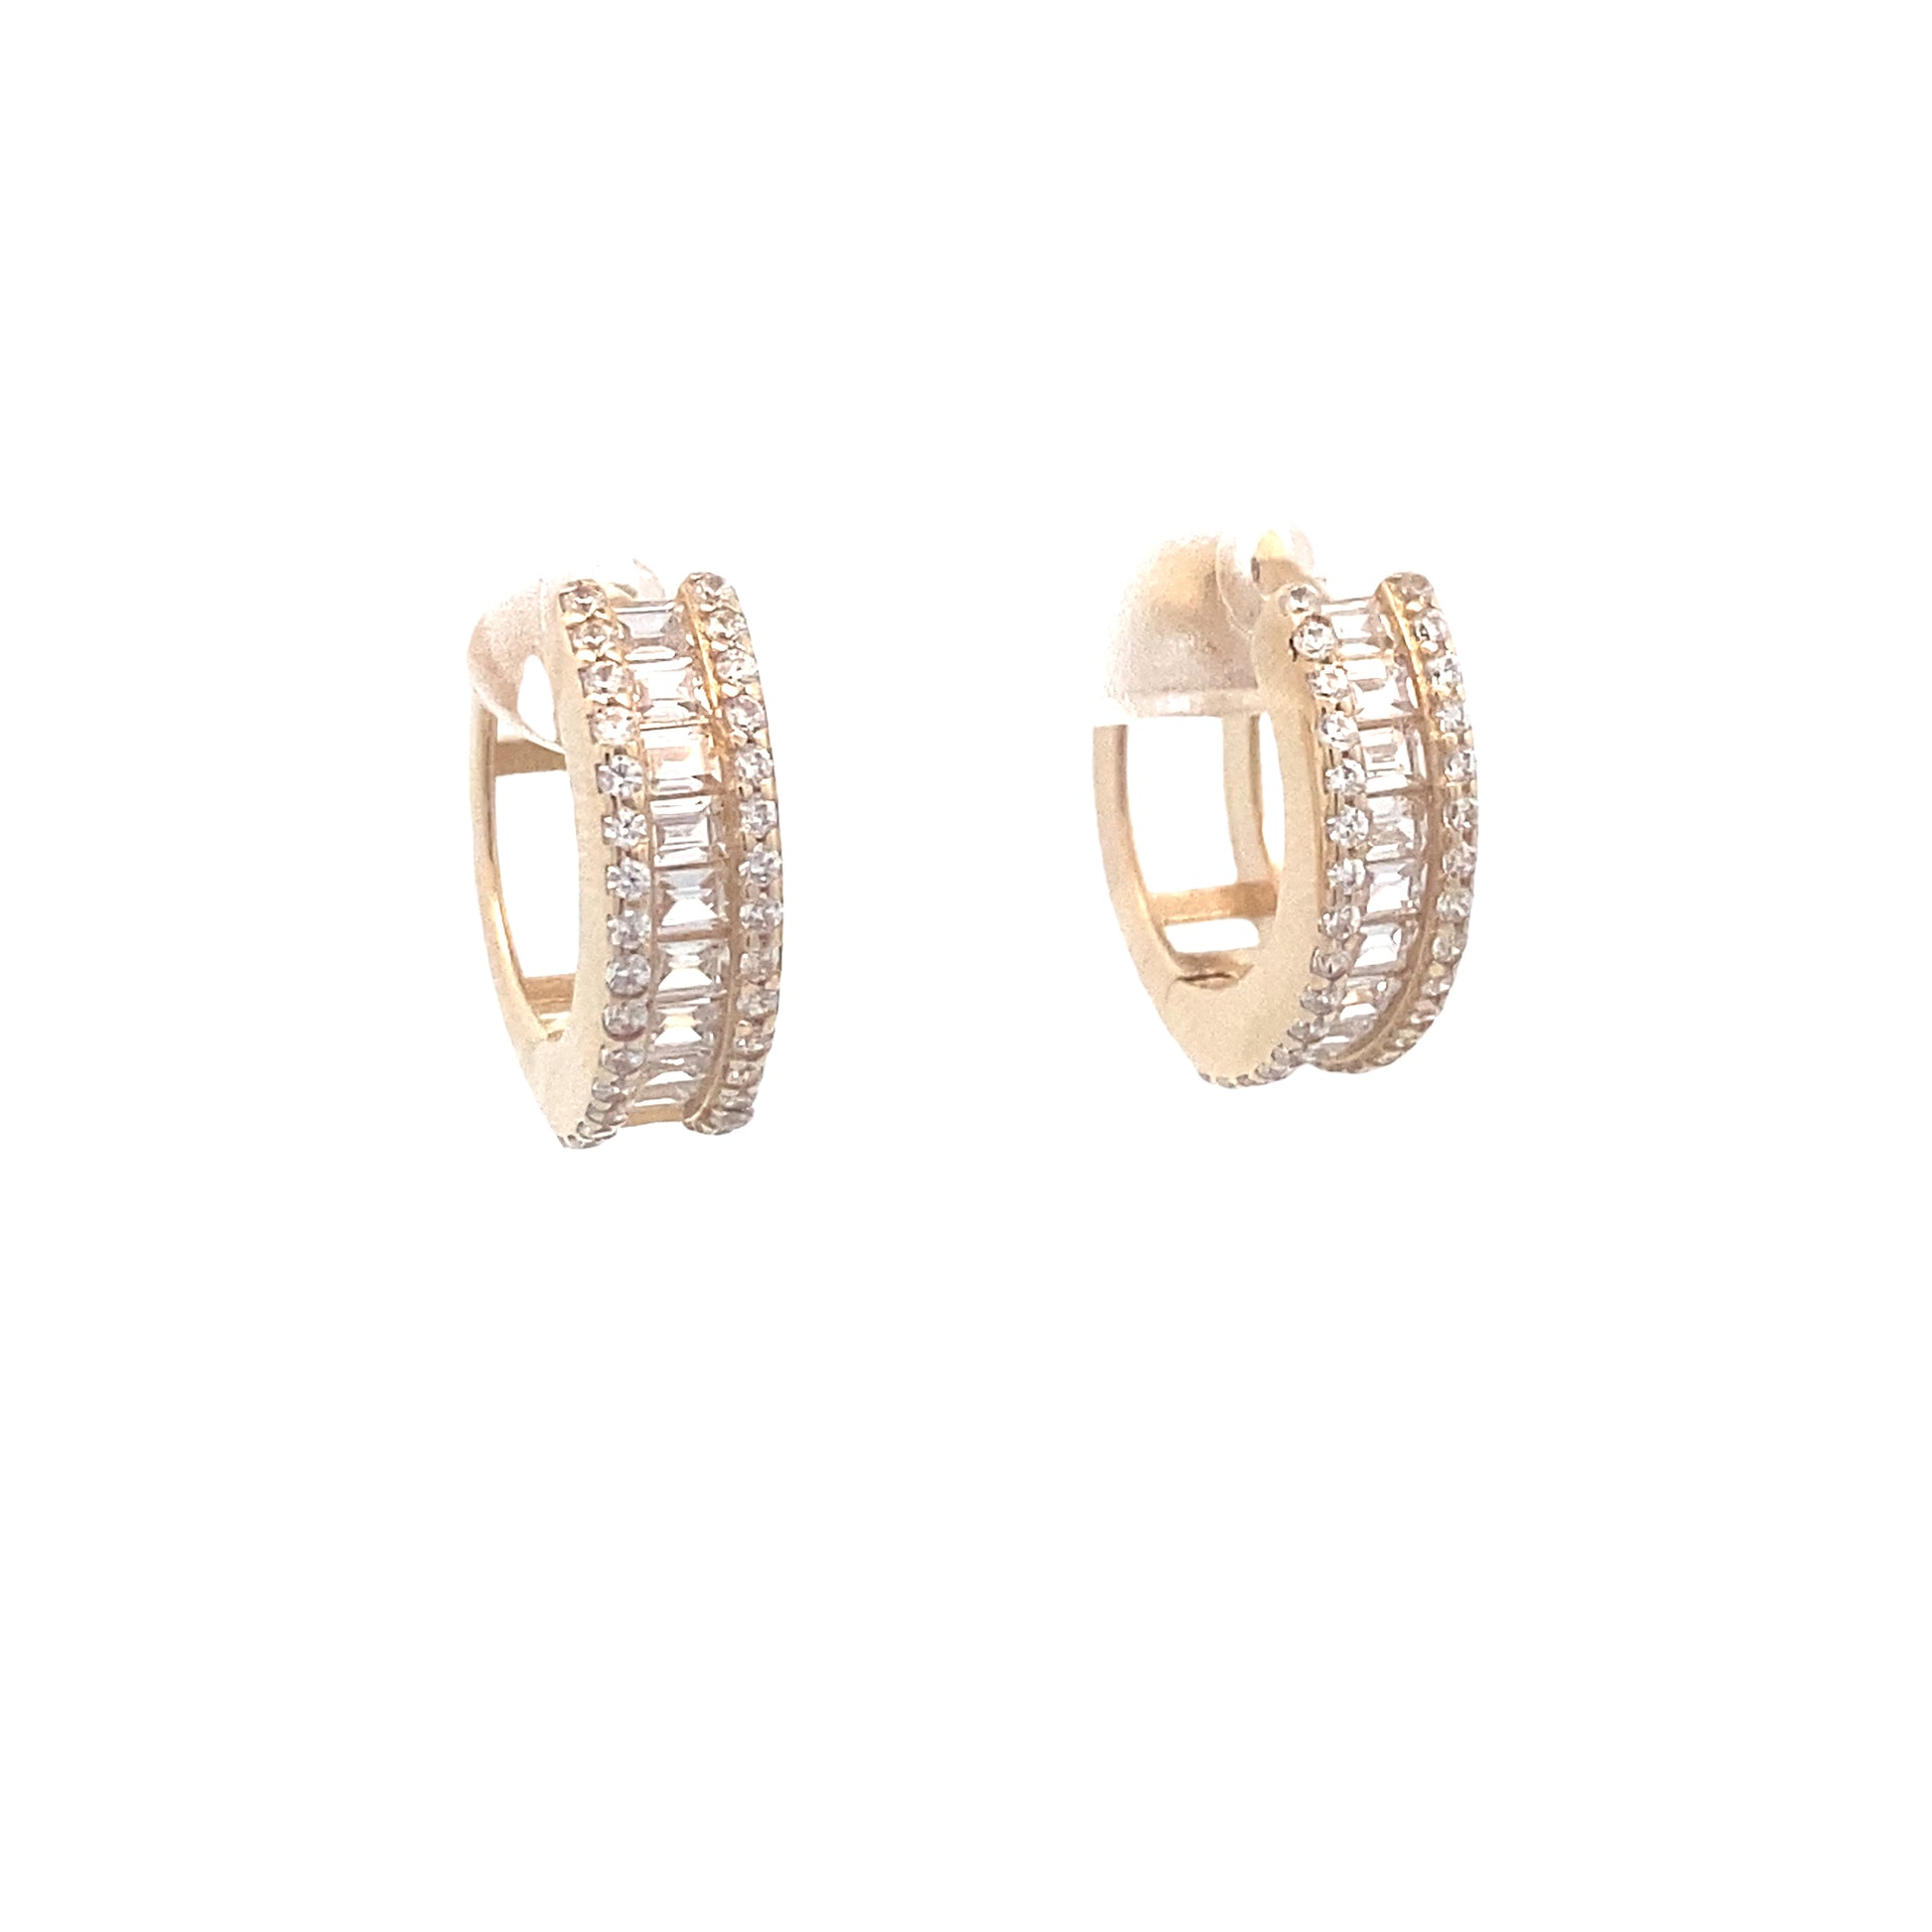 14K Gold Earrings with Baguette CZ | Luby Gold Collection | Luby 